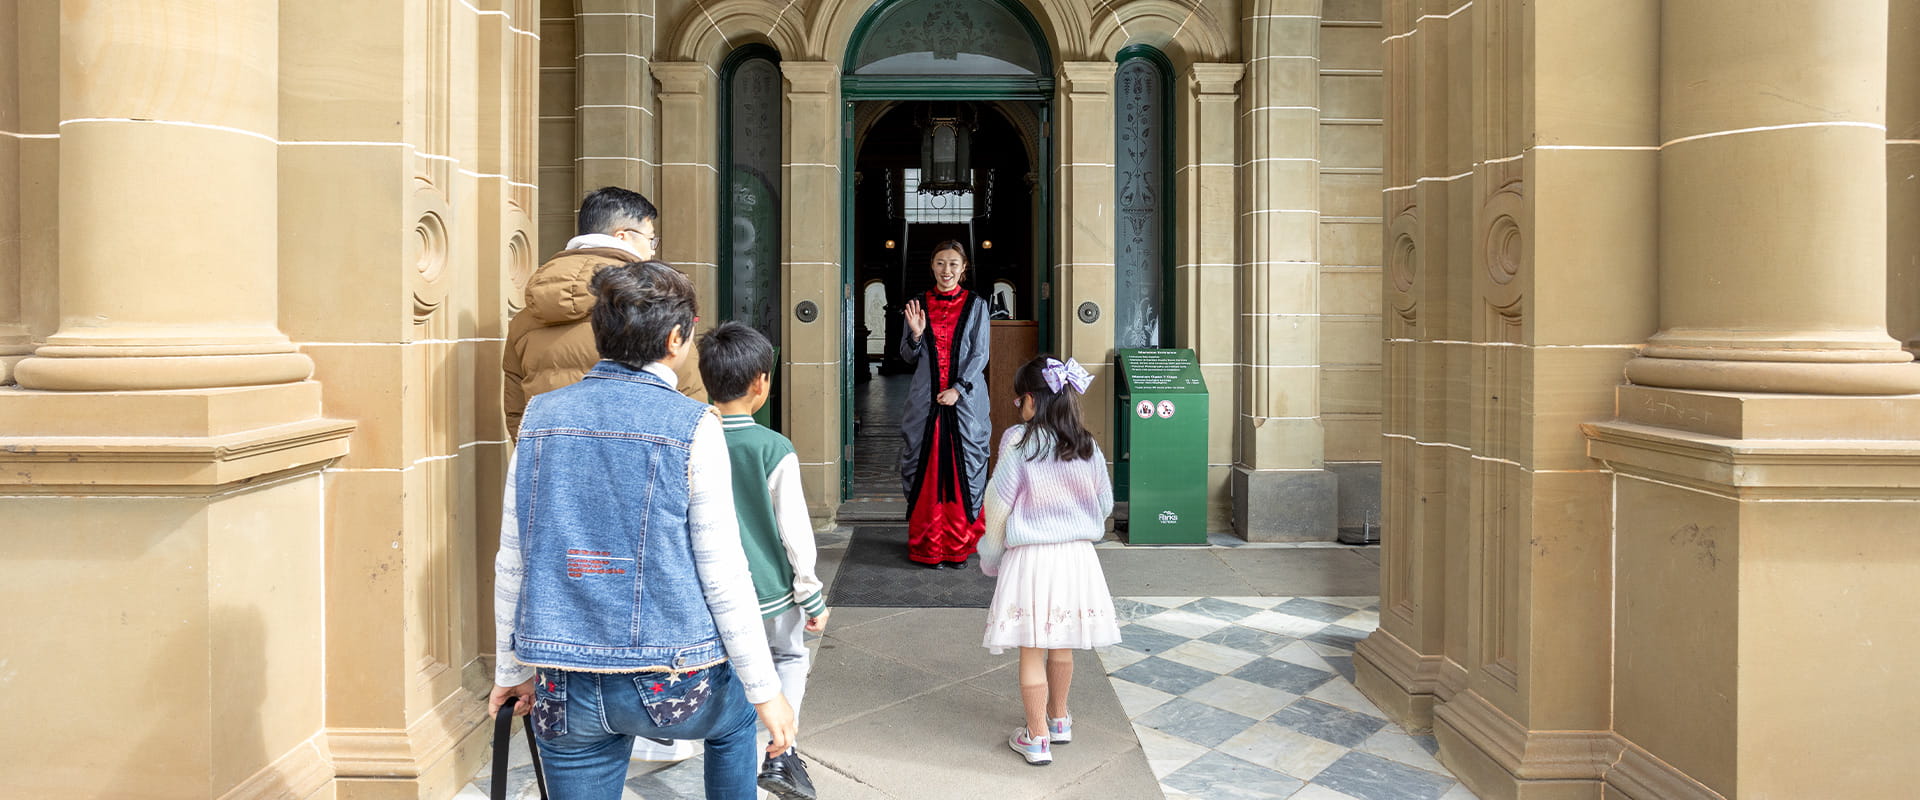 A tour guide in period costume greeting a family as they approach the entrance of the Werribee Mansion.